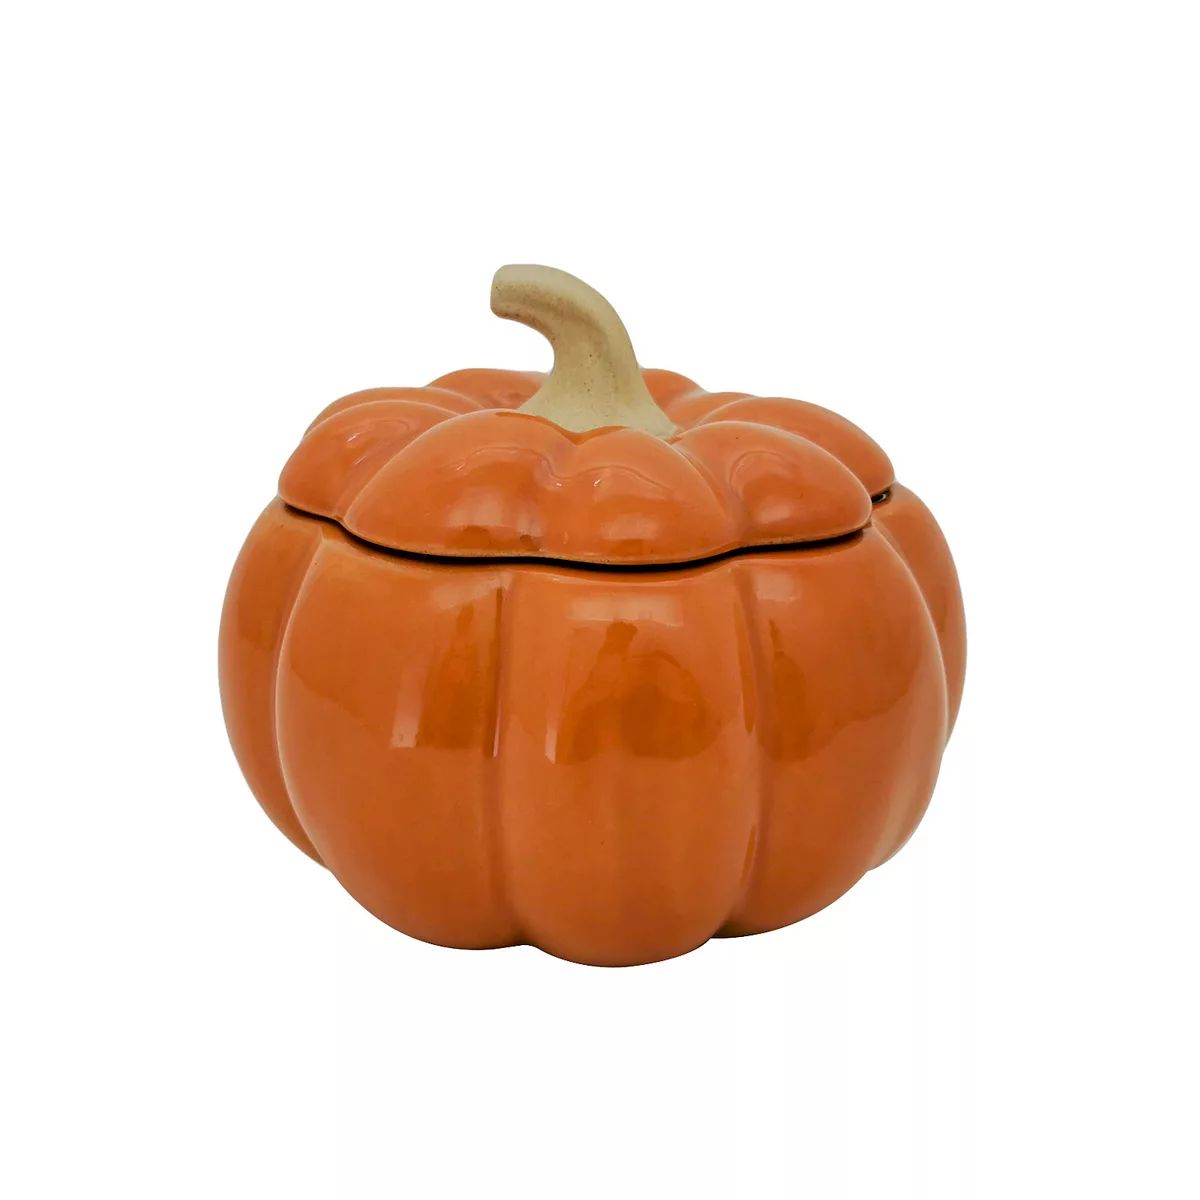 Celebrate Together™ Fall Harvest Small Tureen | Kohl's